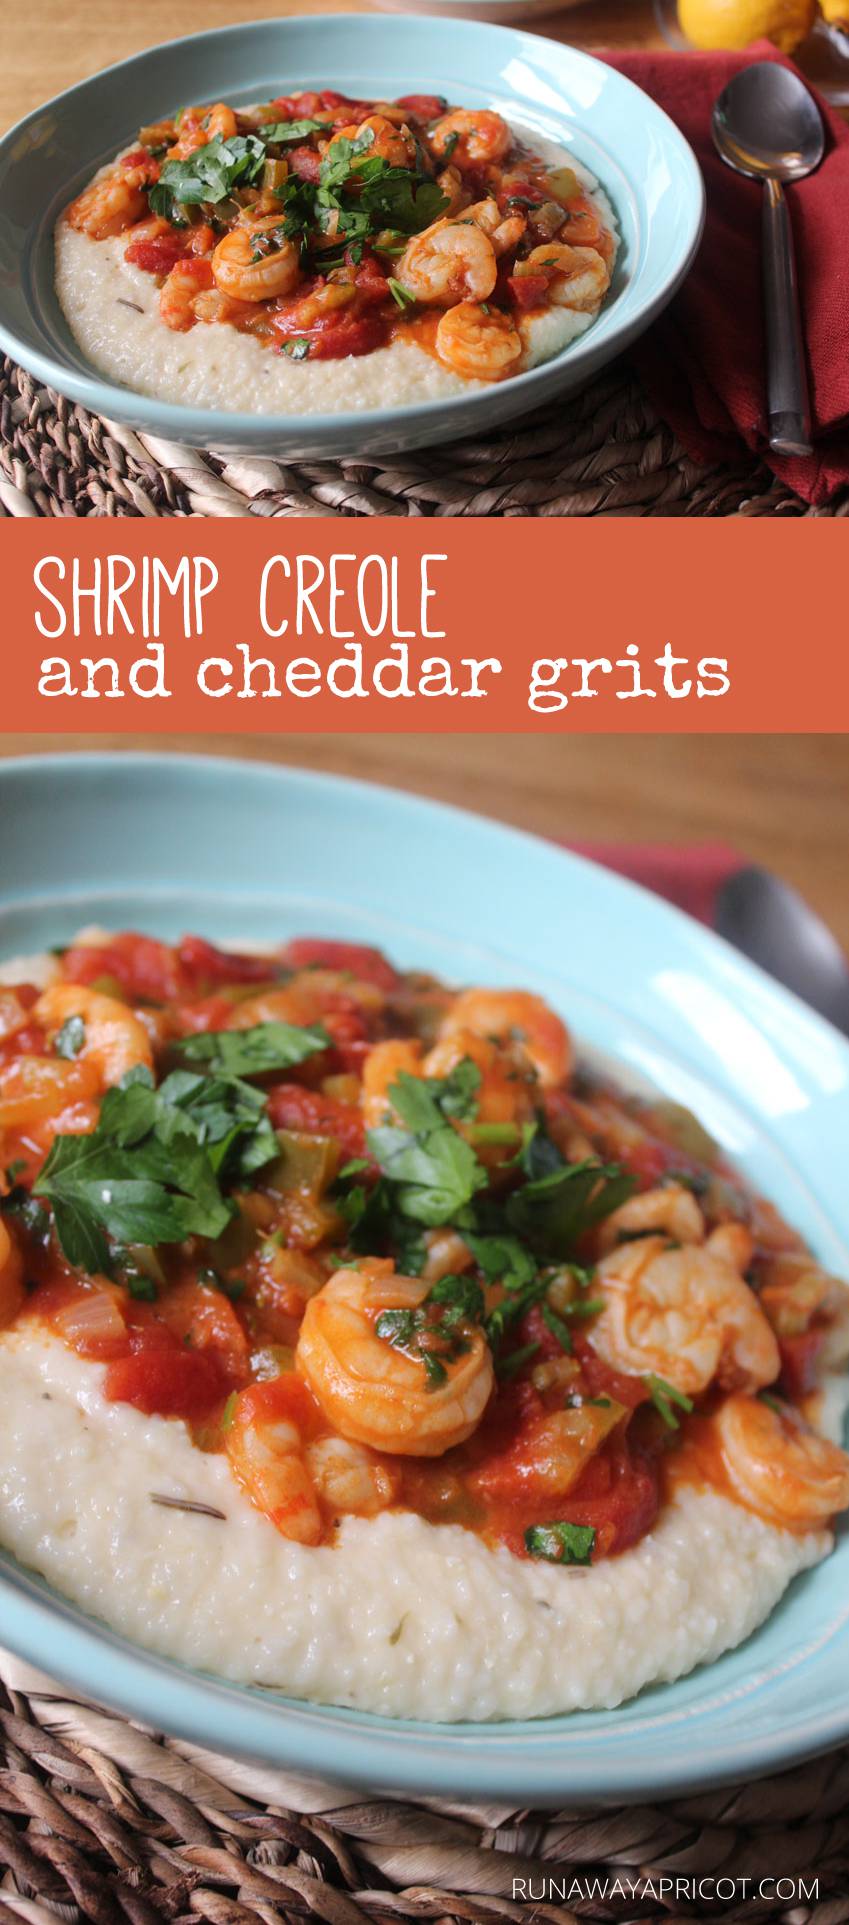 Shrimp Creole and Cheddar Grits // Runaway Apricot - A delicious vegetable-rich meal for brunch, lunch or dinner